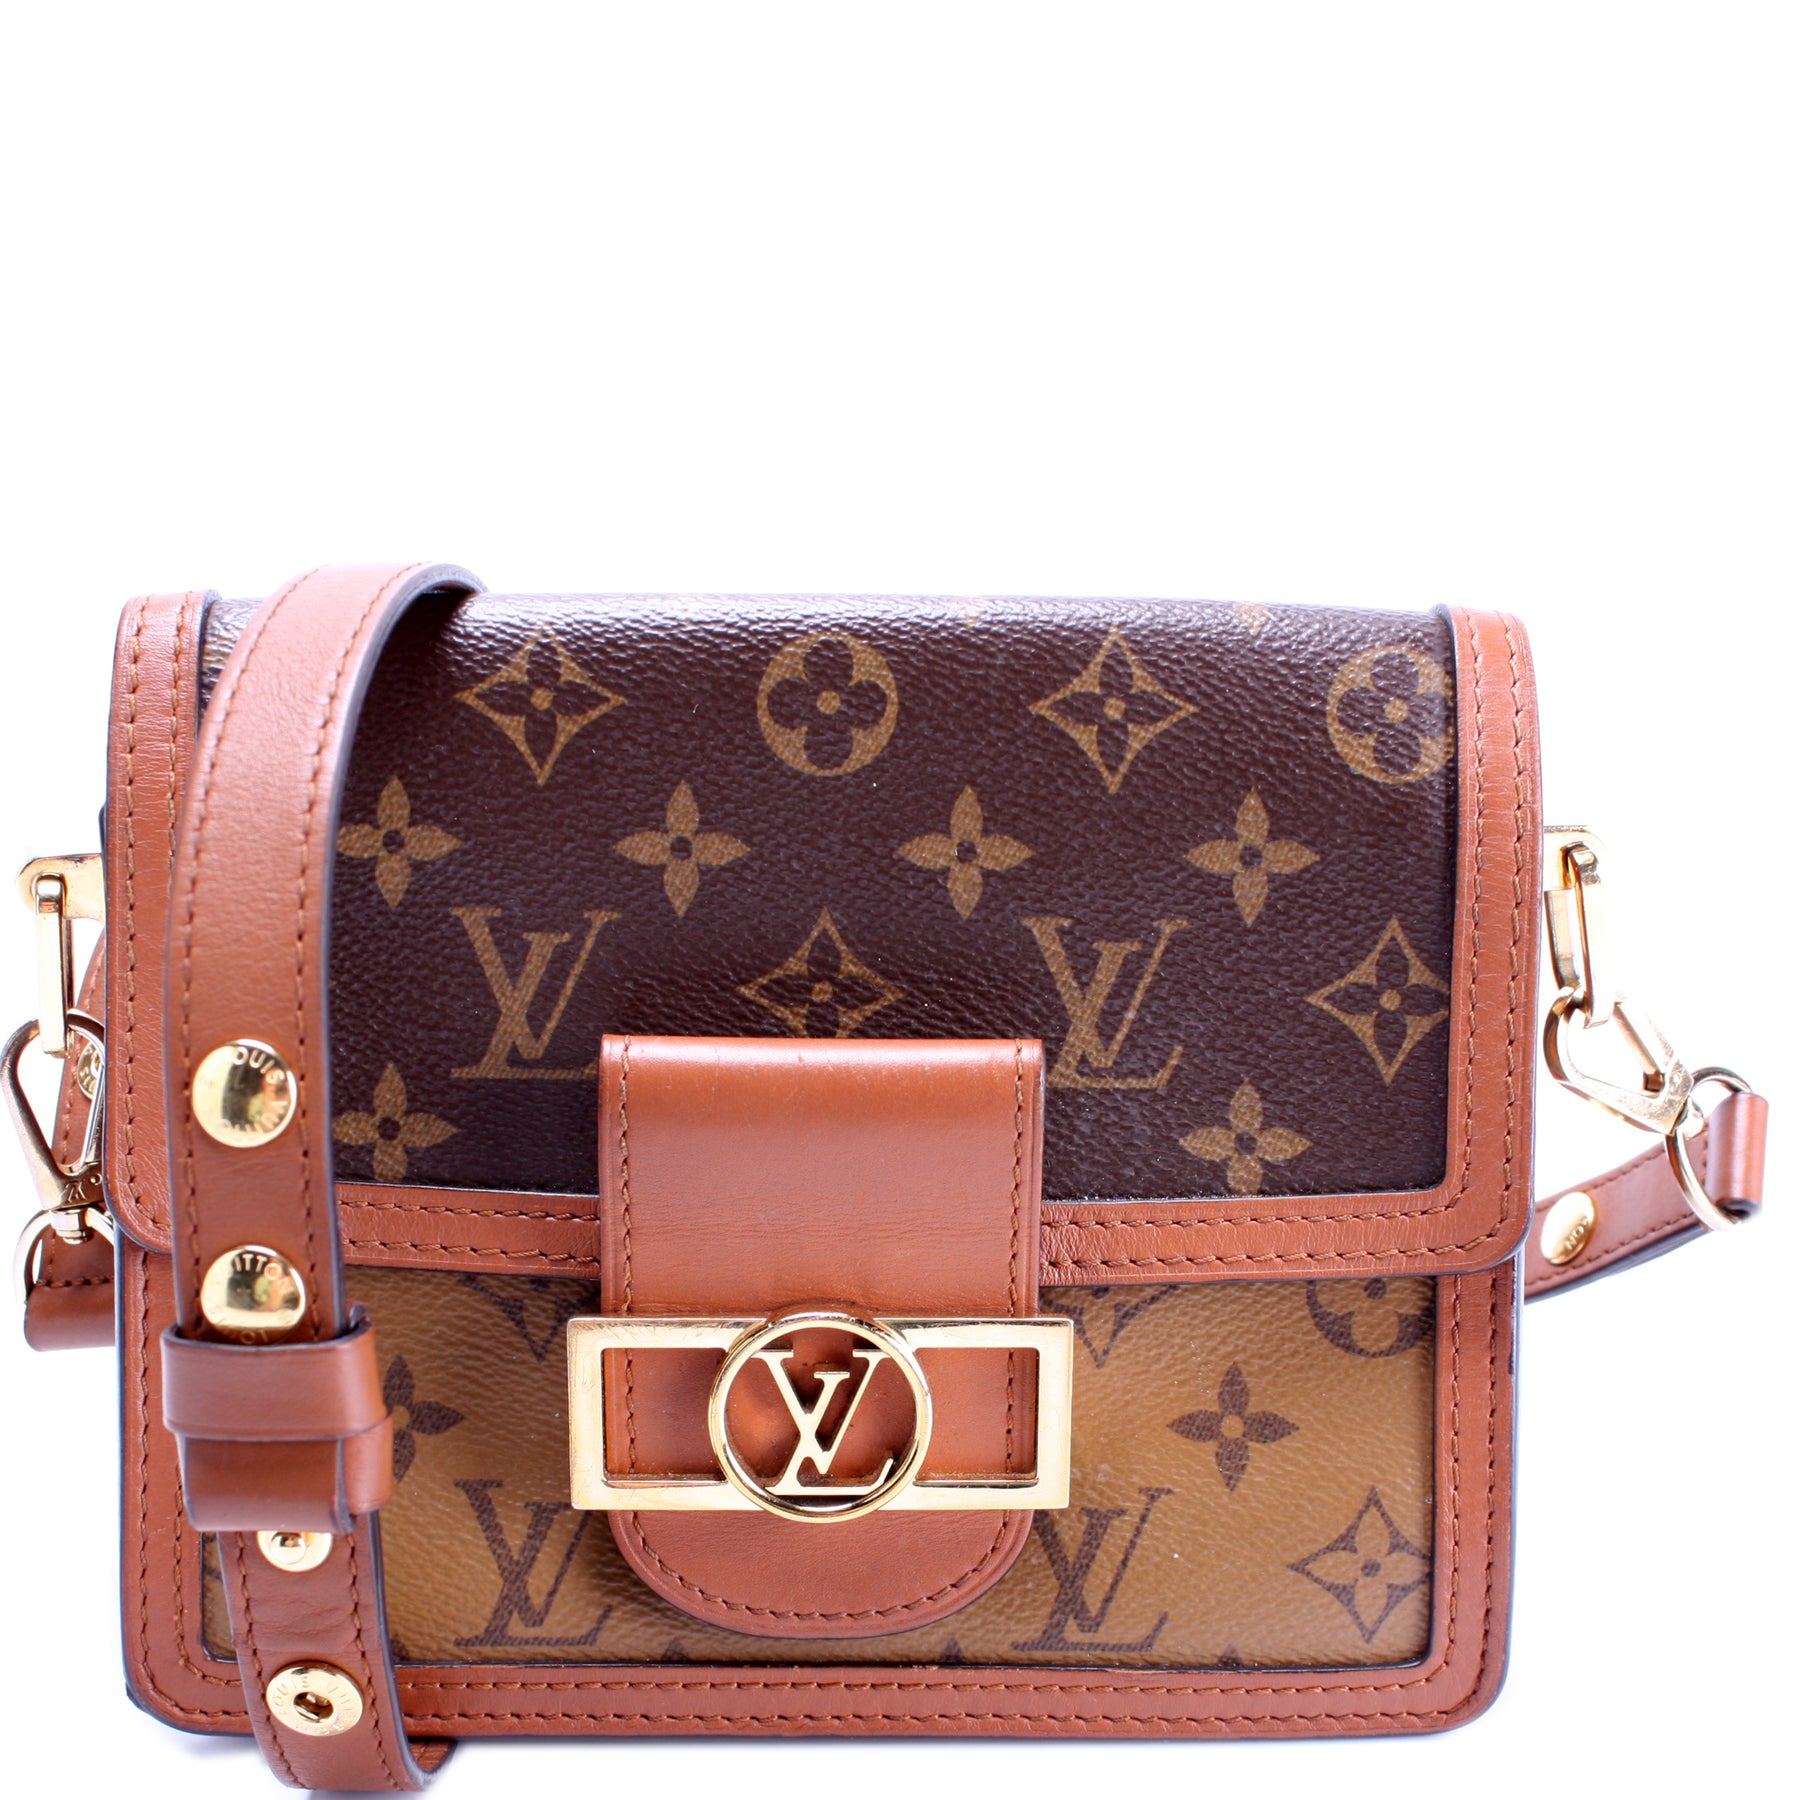 Wearing the Mini Dauphine bag from Louis Vuitton